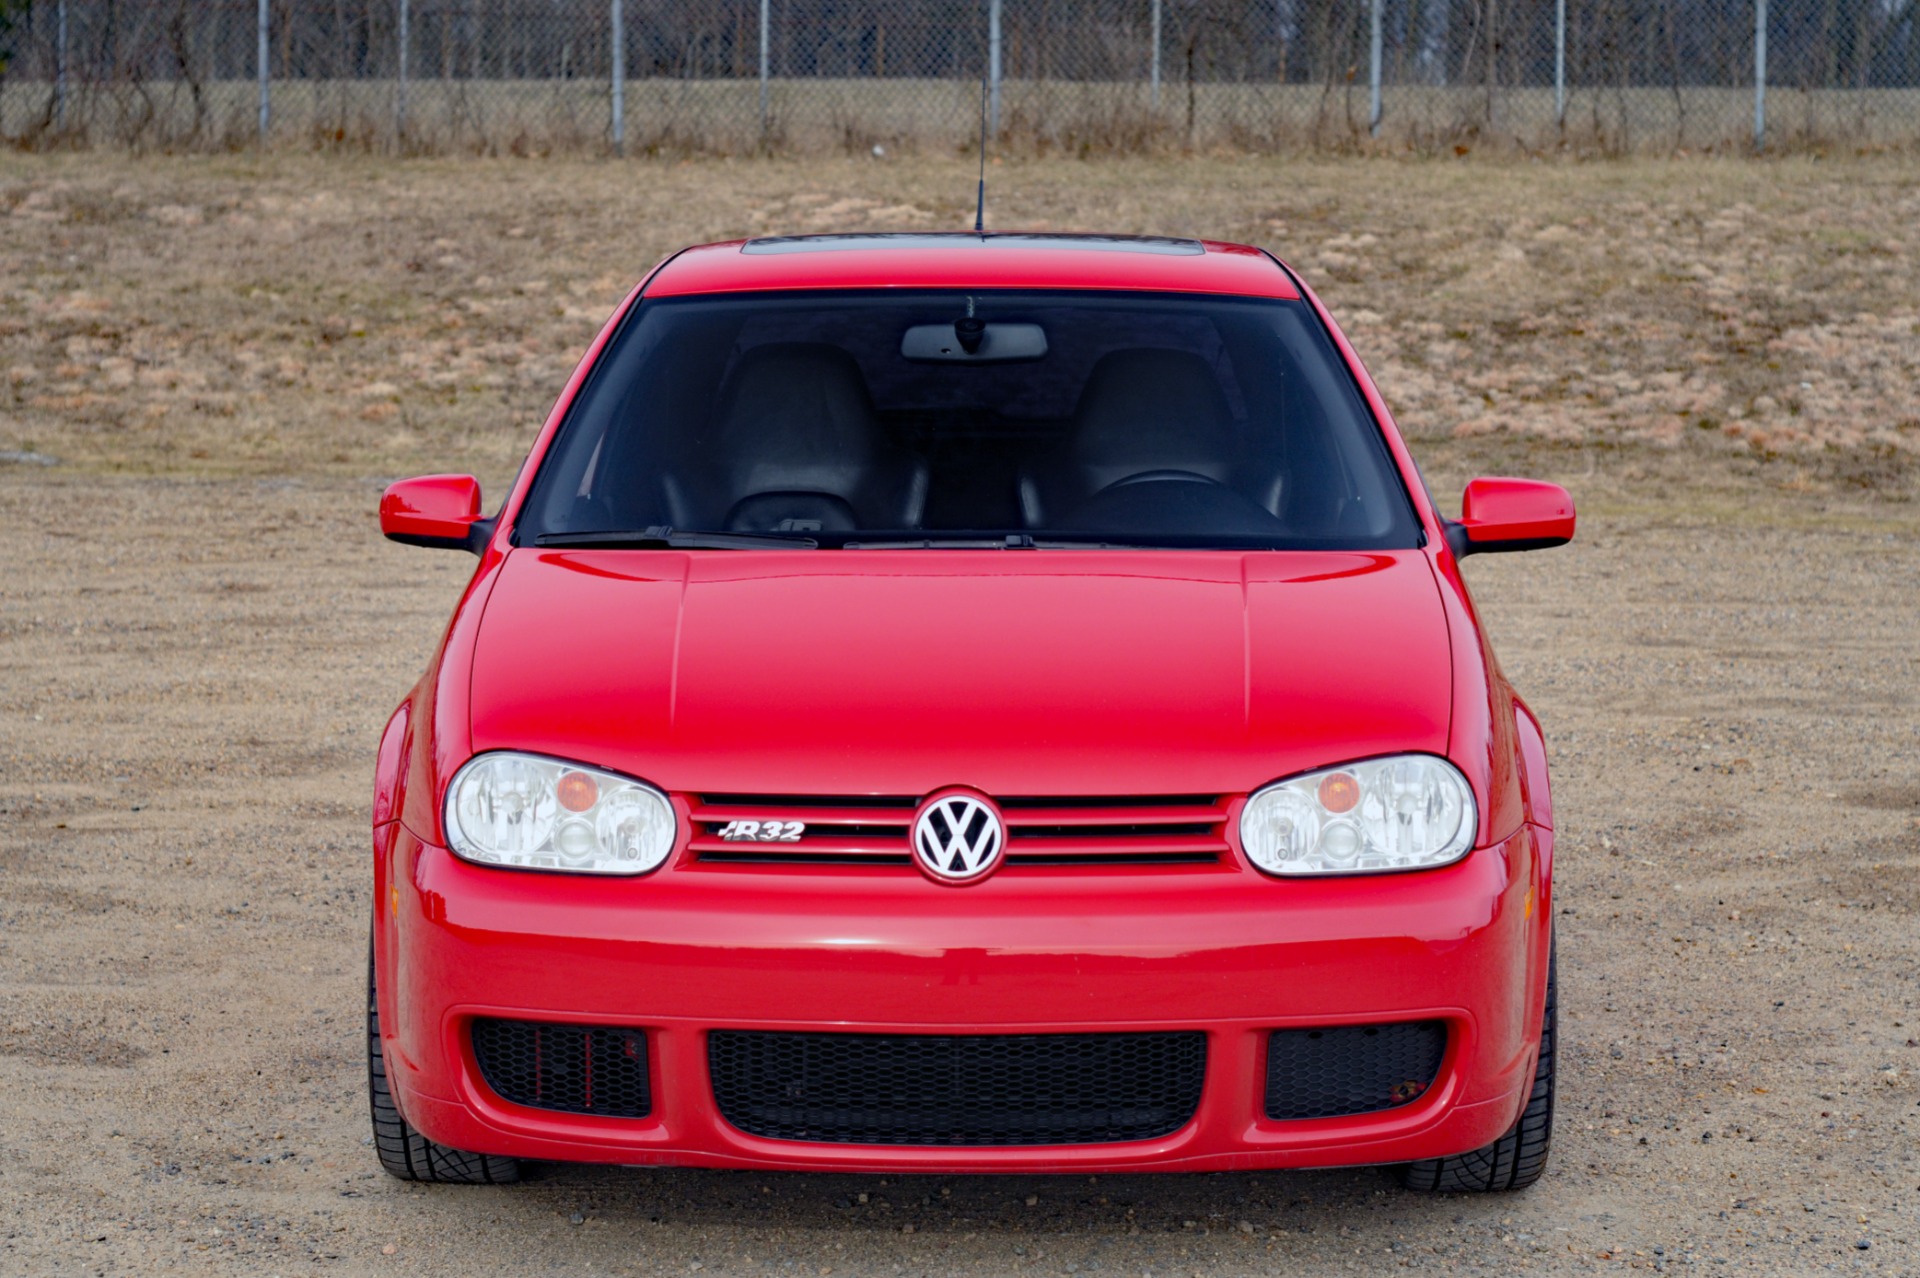 Front View of Red Volkswagen Golf 4 R32 Parked in the Streetby